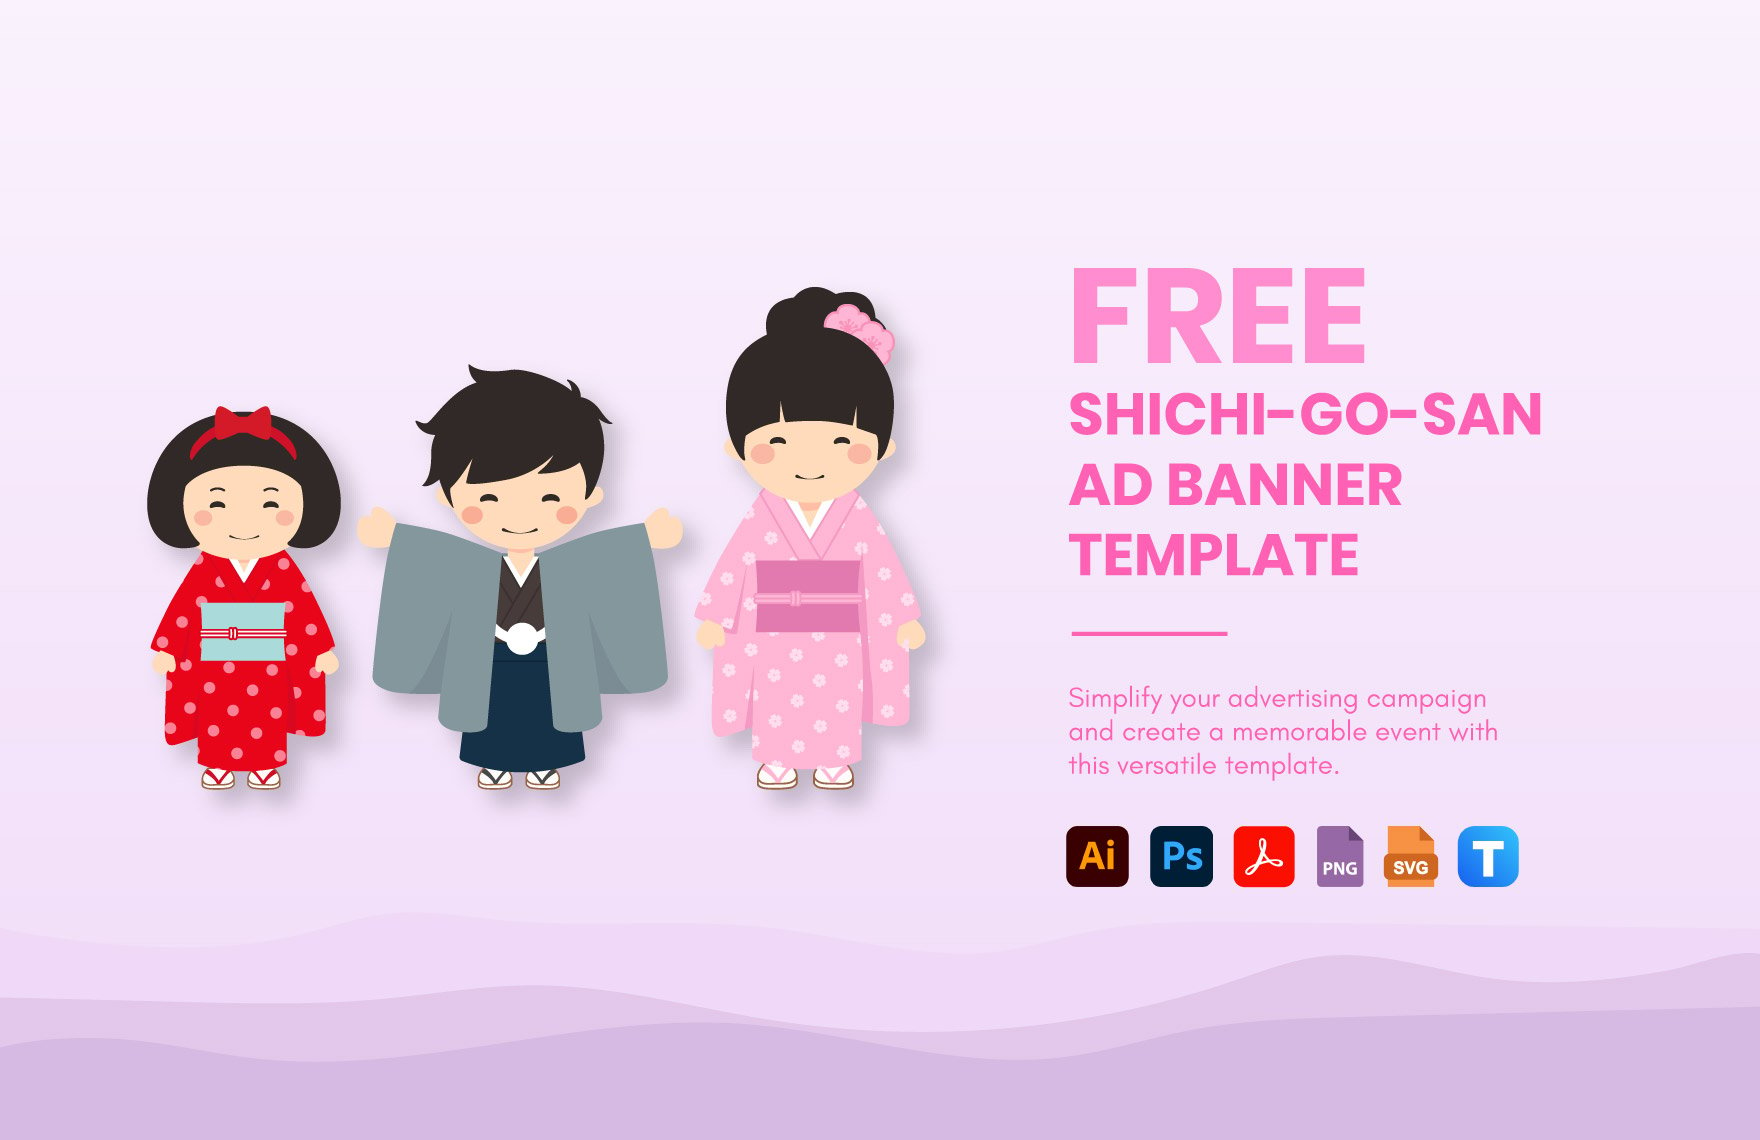 Free Shichi-Go-San Ad Banner Template in PDF, Illustrator, PSD, SVG, PNG